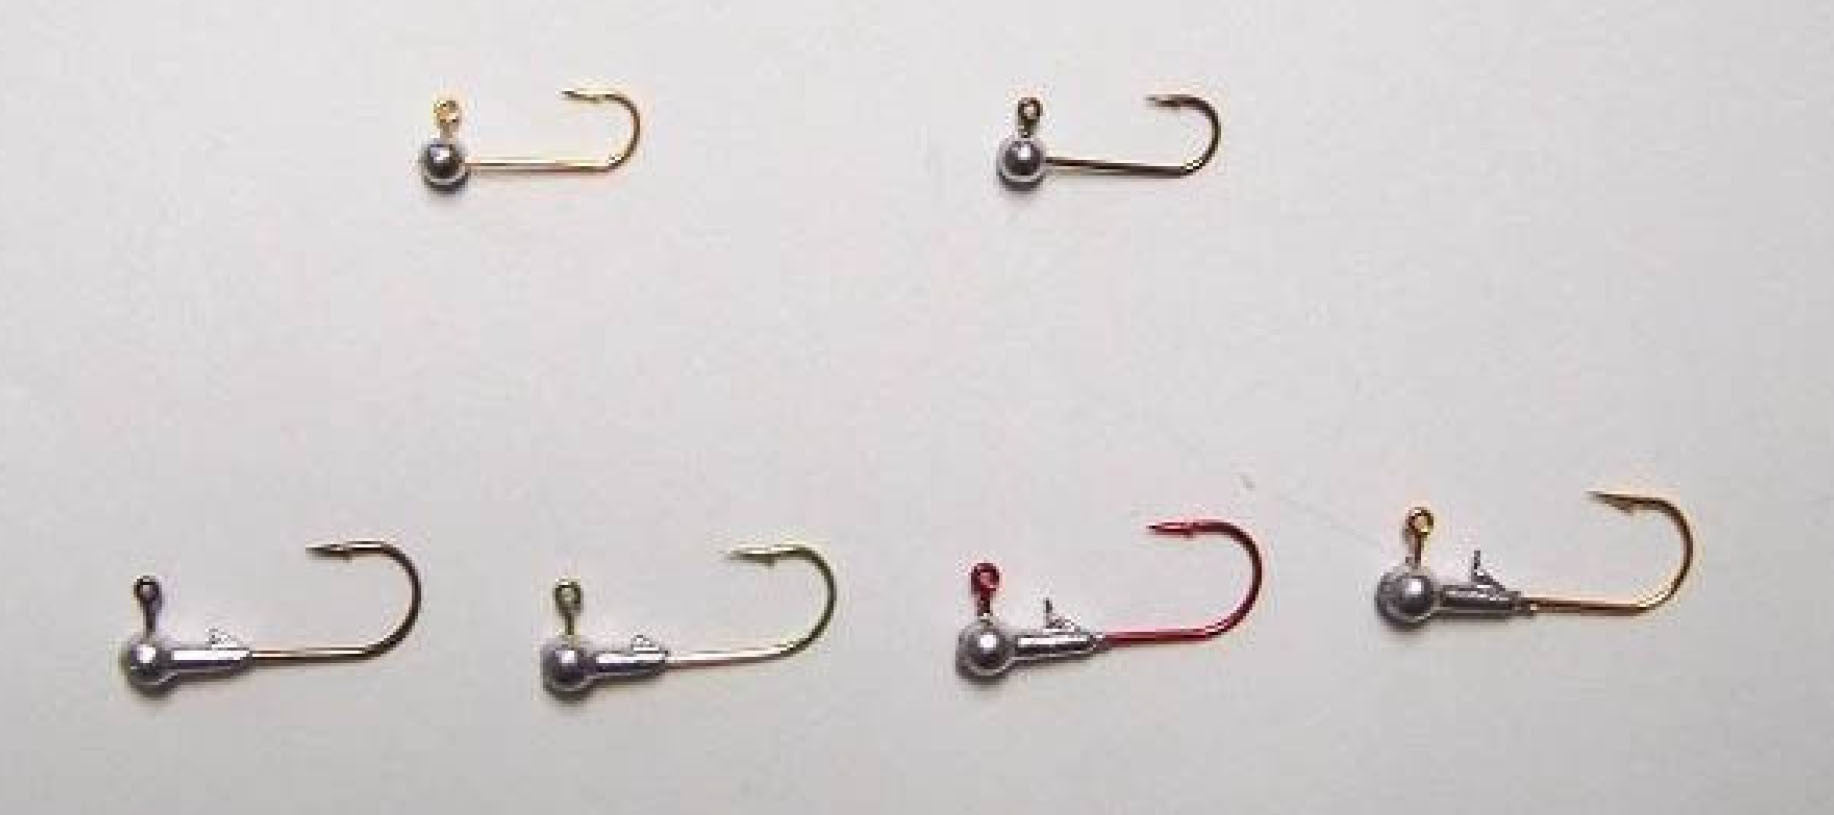 Fish Stalker Round Jig Heads (10 Pack) - Angler's Headquarters